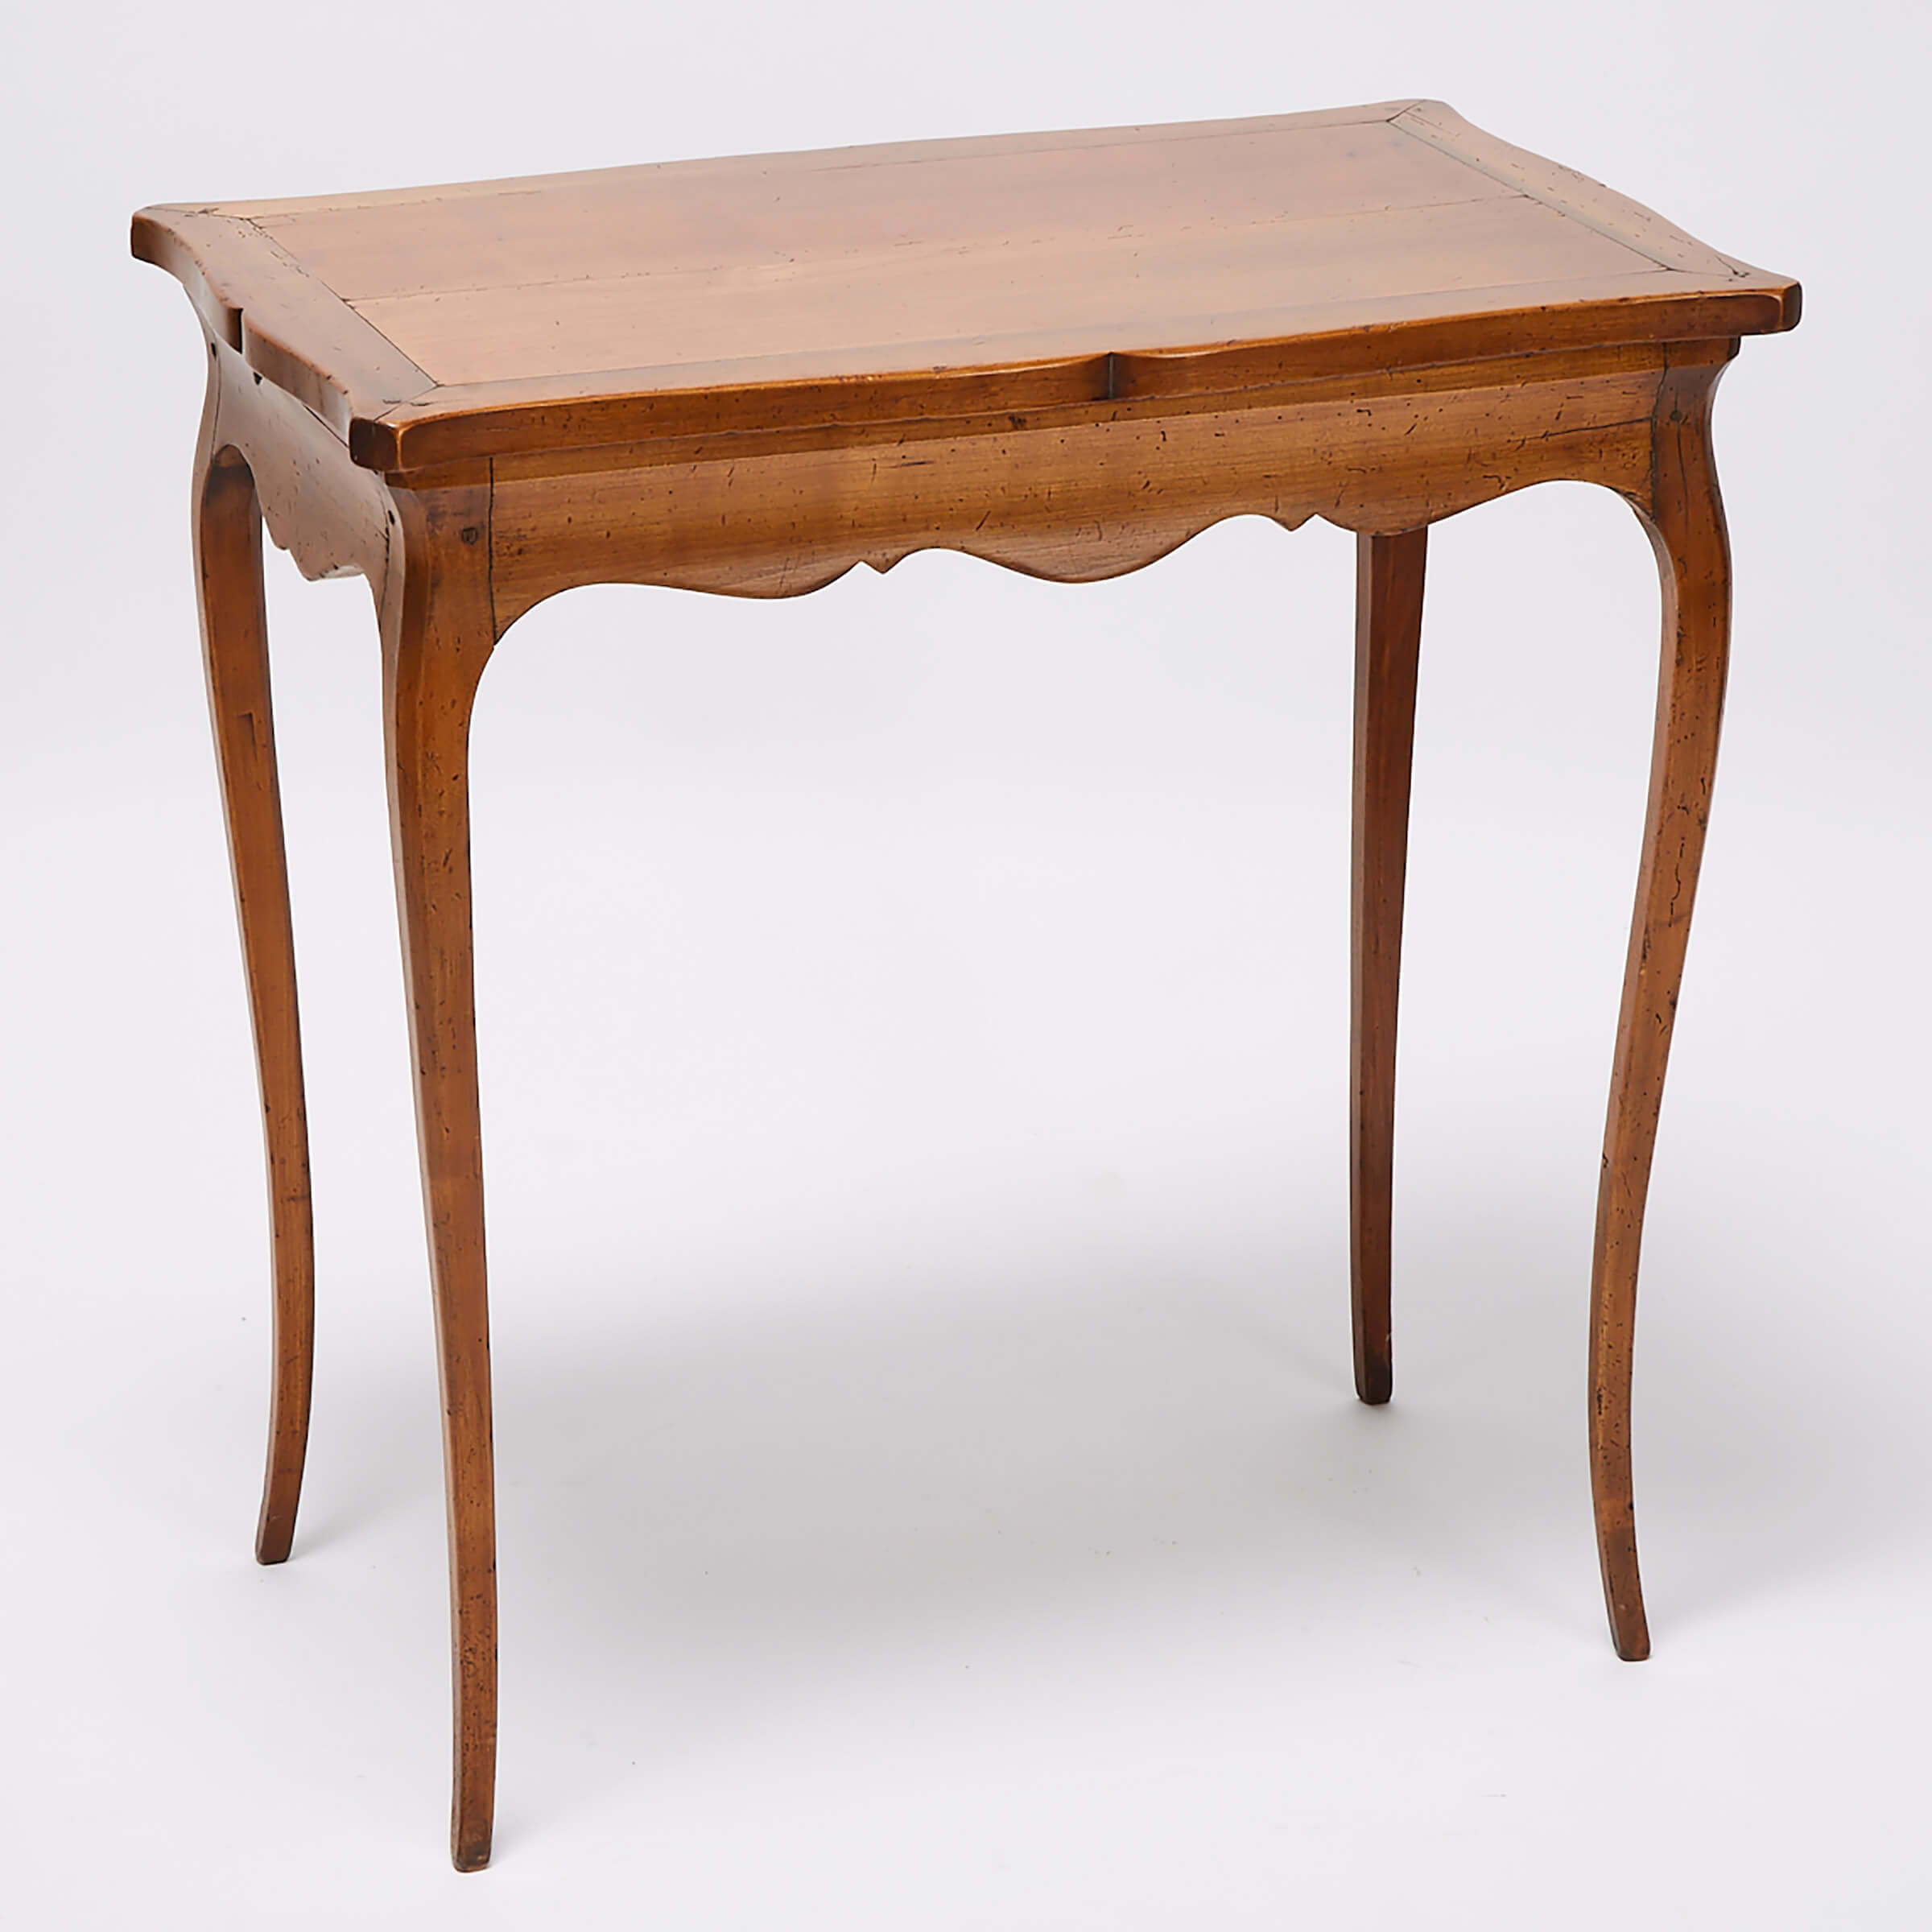 French Provincial Walnut Poudreuse, 19th century